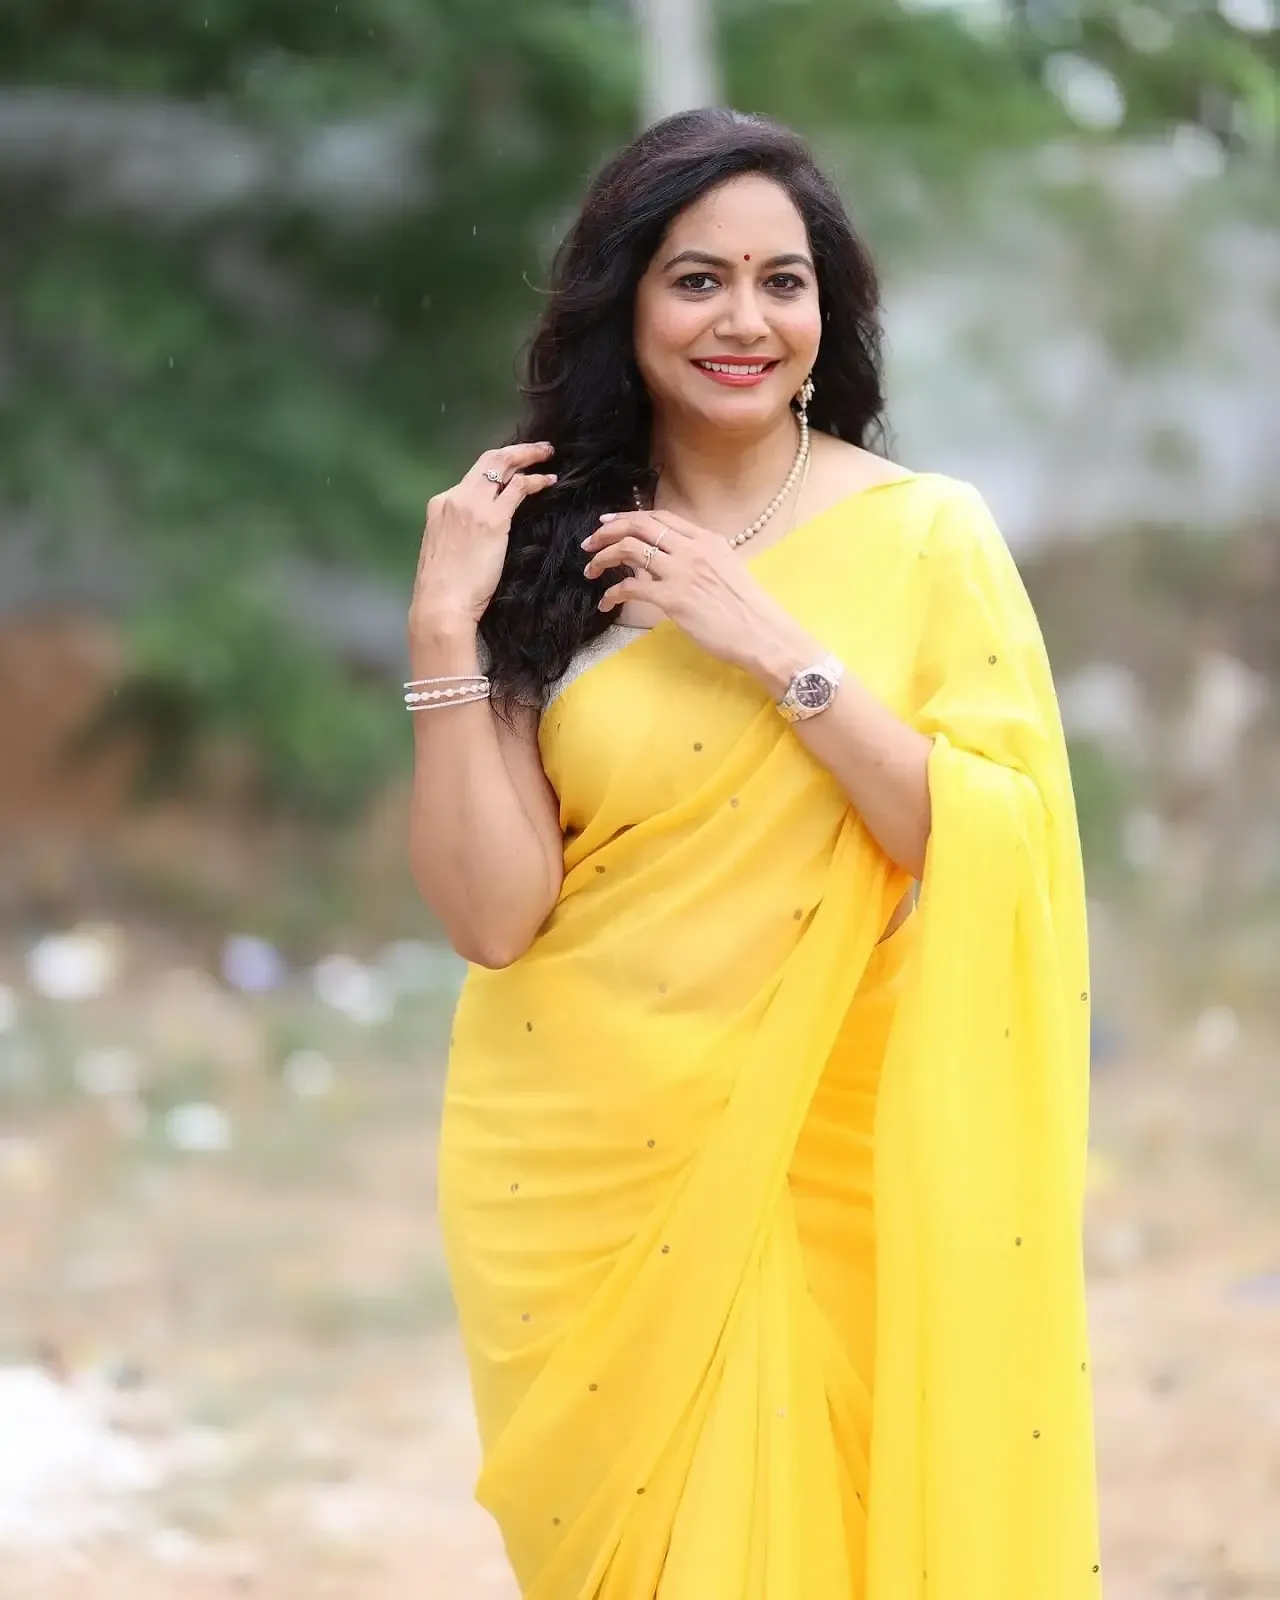 BEAUTIFUL INDIAN SINGER SUNITHA SMILE IMAGES IN YELLOW SAREE